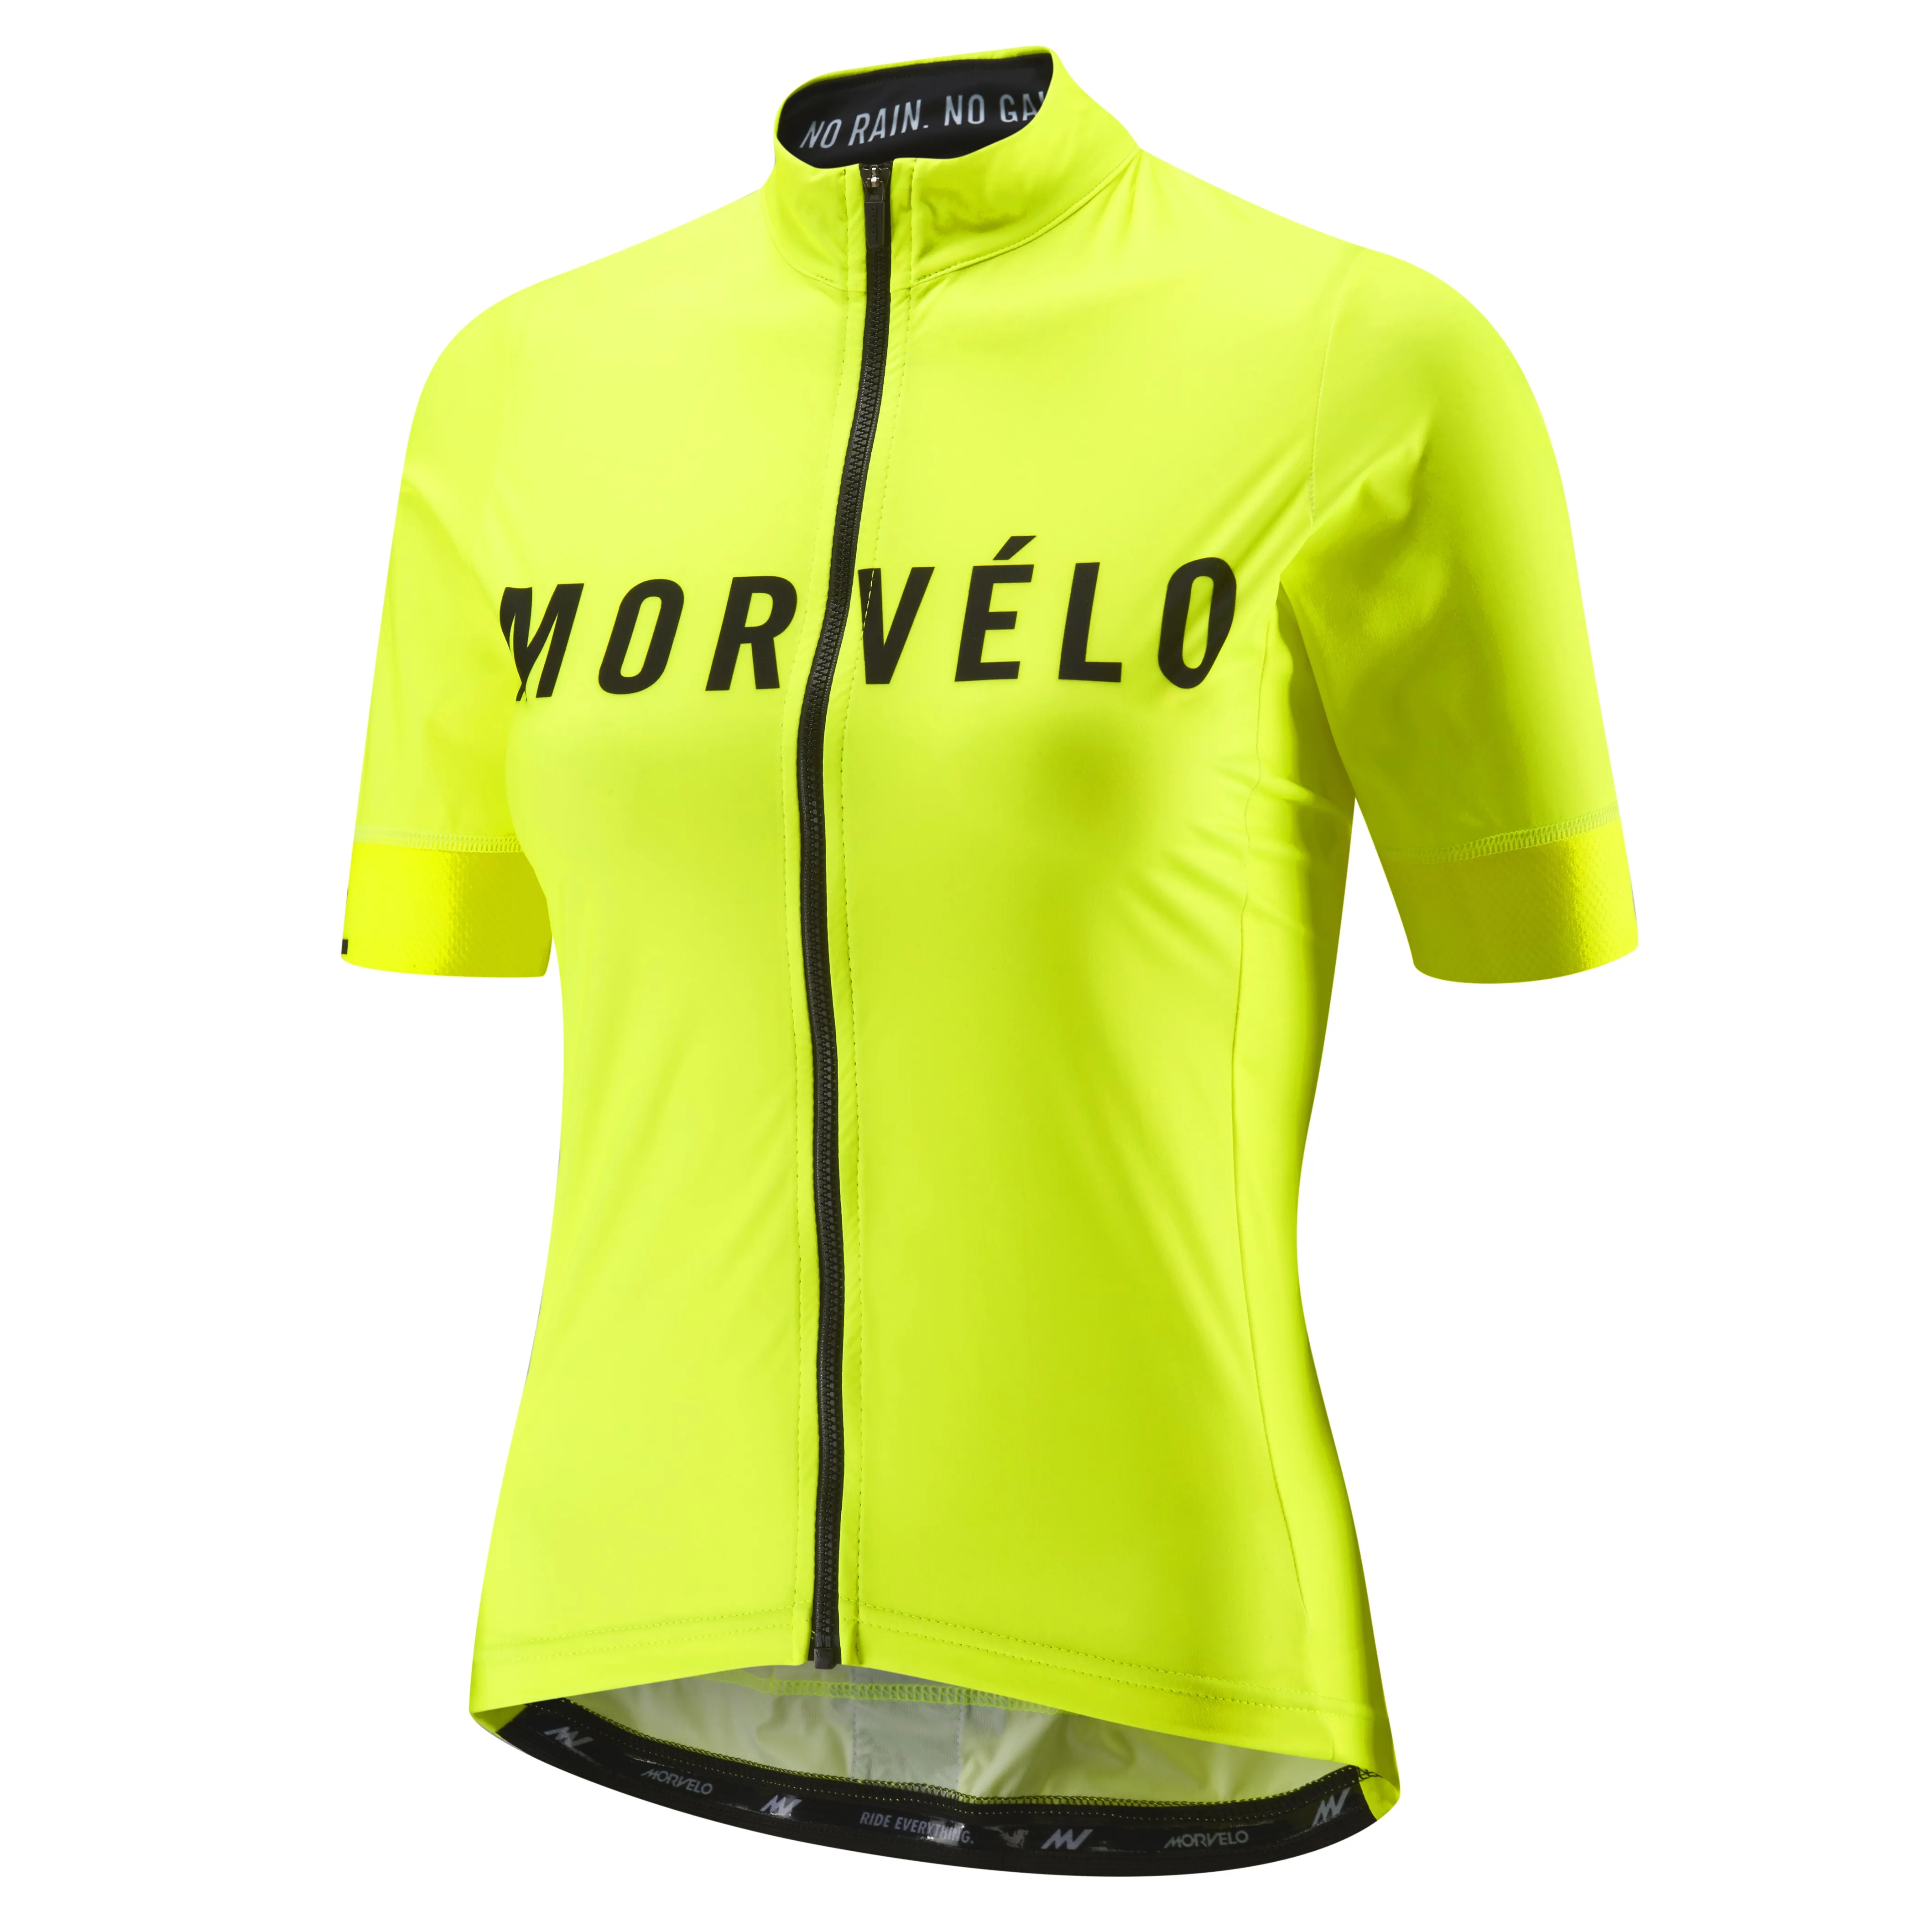 Morvelo Cycling Jersey Set Women 2020 Professional Bicycle Sportswear Bicycle Shorts Sleeve Cycling Clothing Maillot de Ciclismo